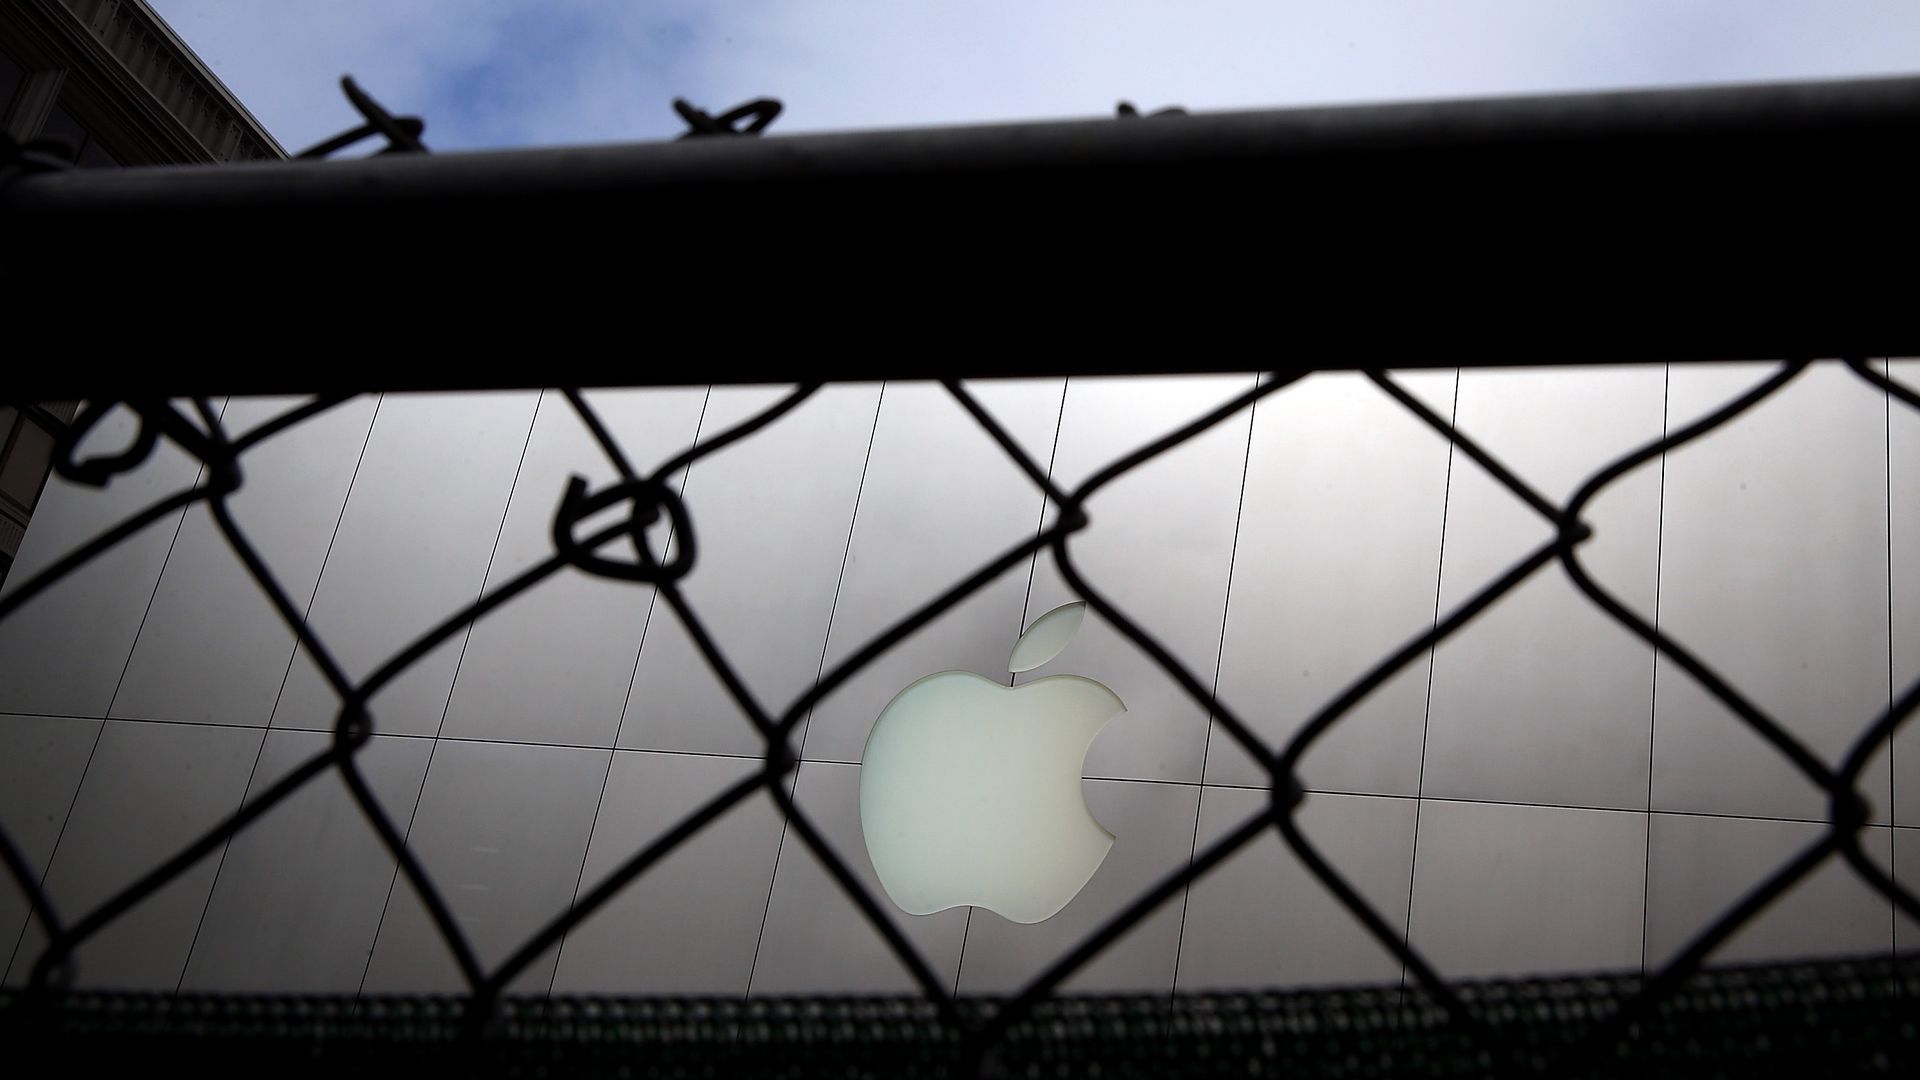 Apple laptop with its log as seen outside through a chain link fence